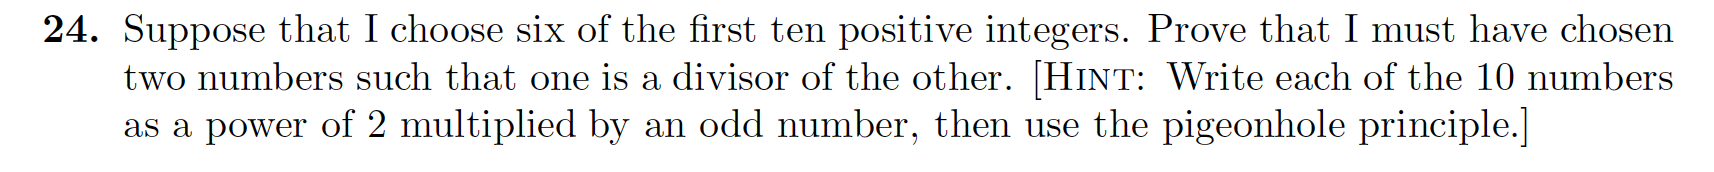 24. Suppose that I choose six of the first ten positive integers. Prove that I must have chosen
two numbers such that one is a divisor of the other. [HINT: Write each of the 10 numbers
as a power of 2 multiplied by an odd number, then use the pigeonhole principle.]
